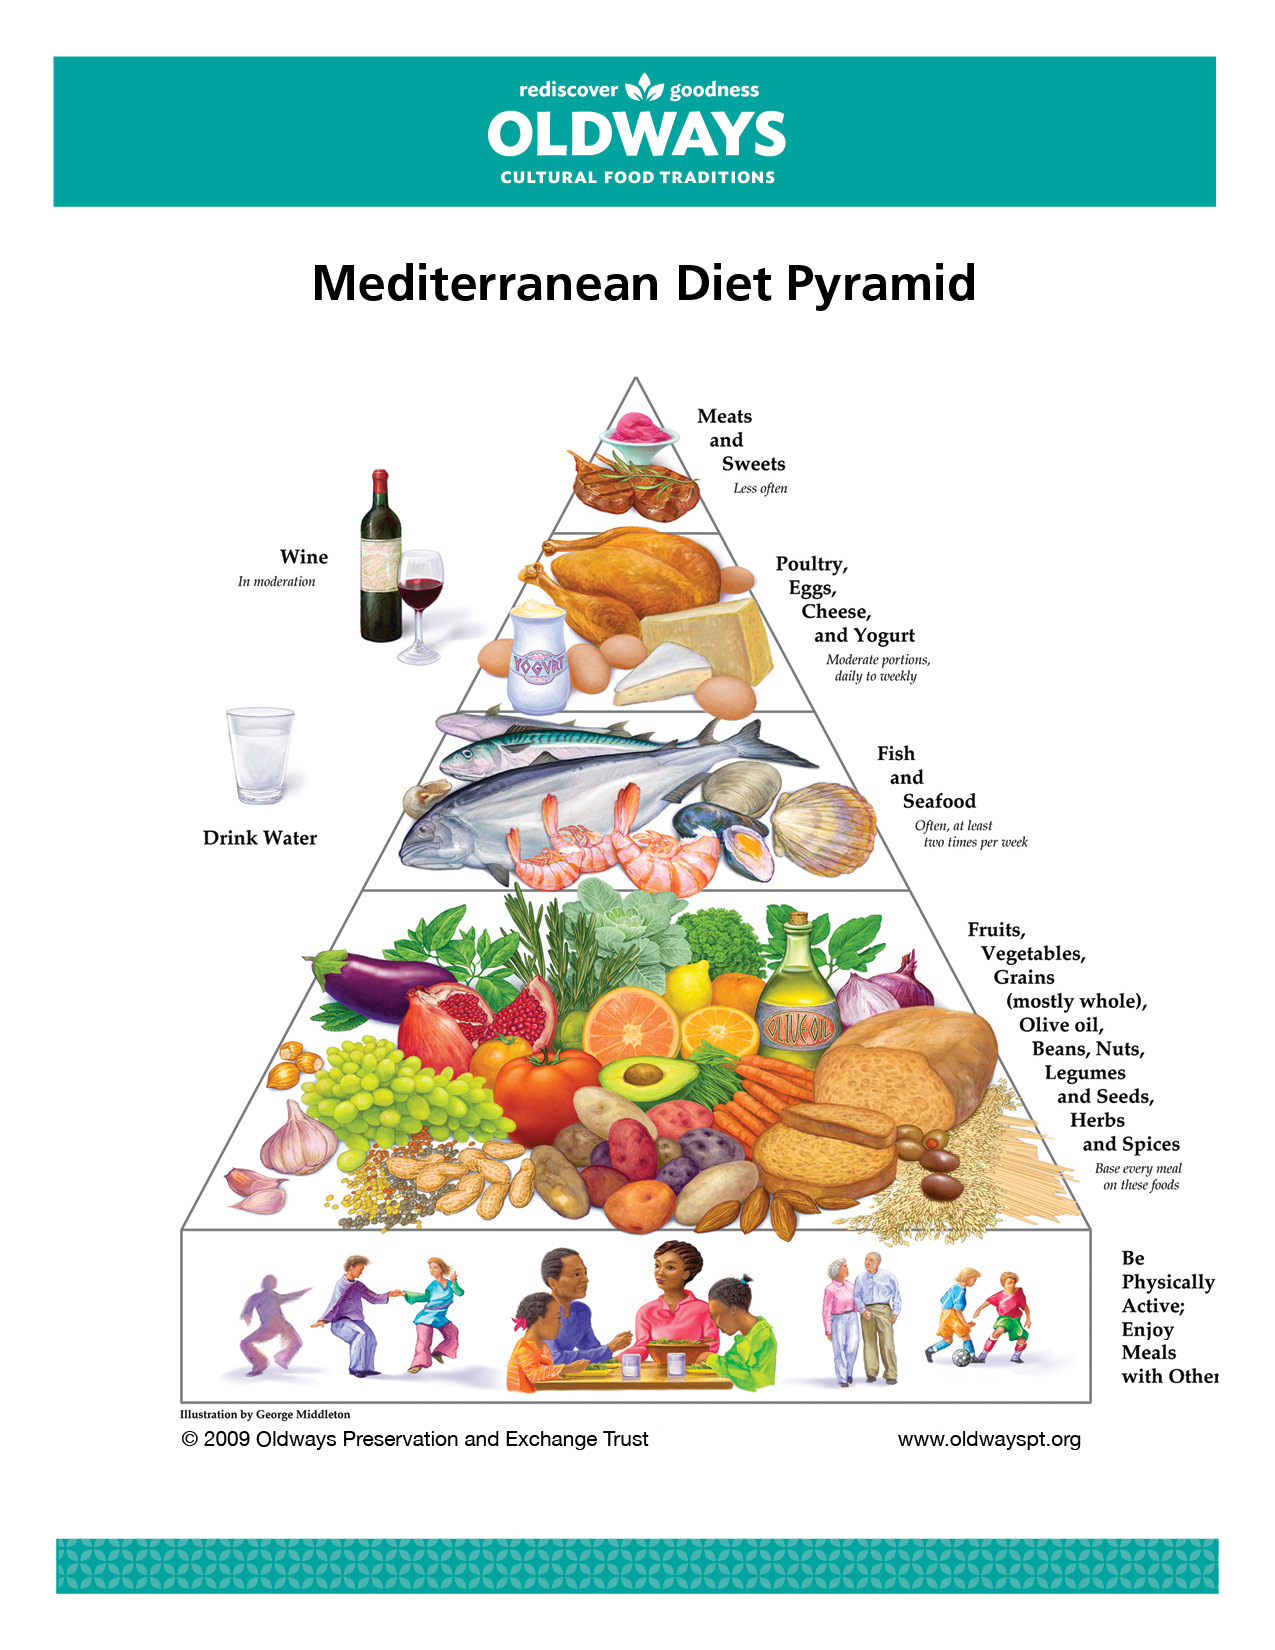  Age Gracefully and Live a Long and Healthy Life With the Mediterranean Diet<br />
